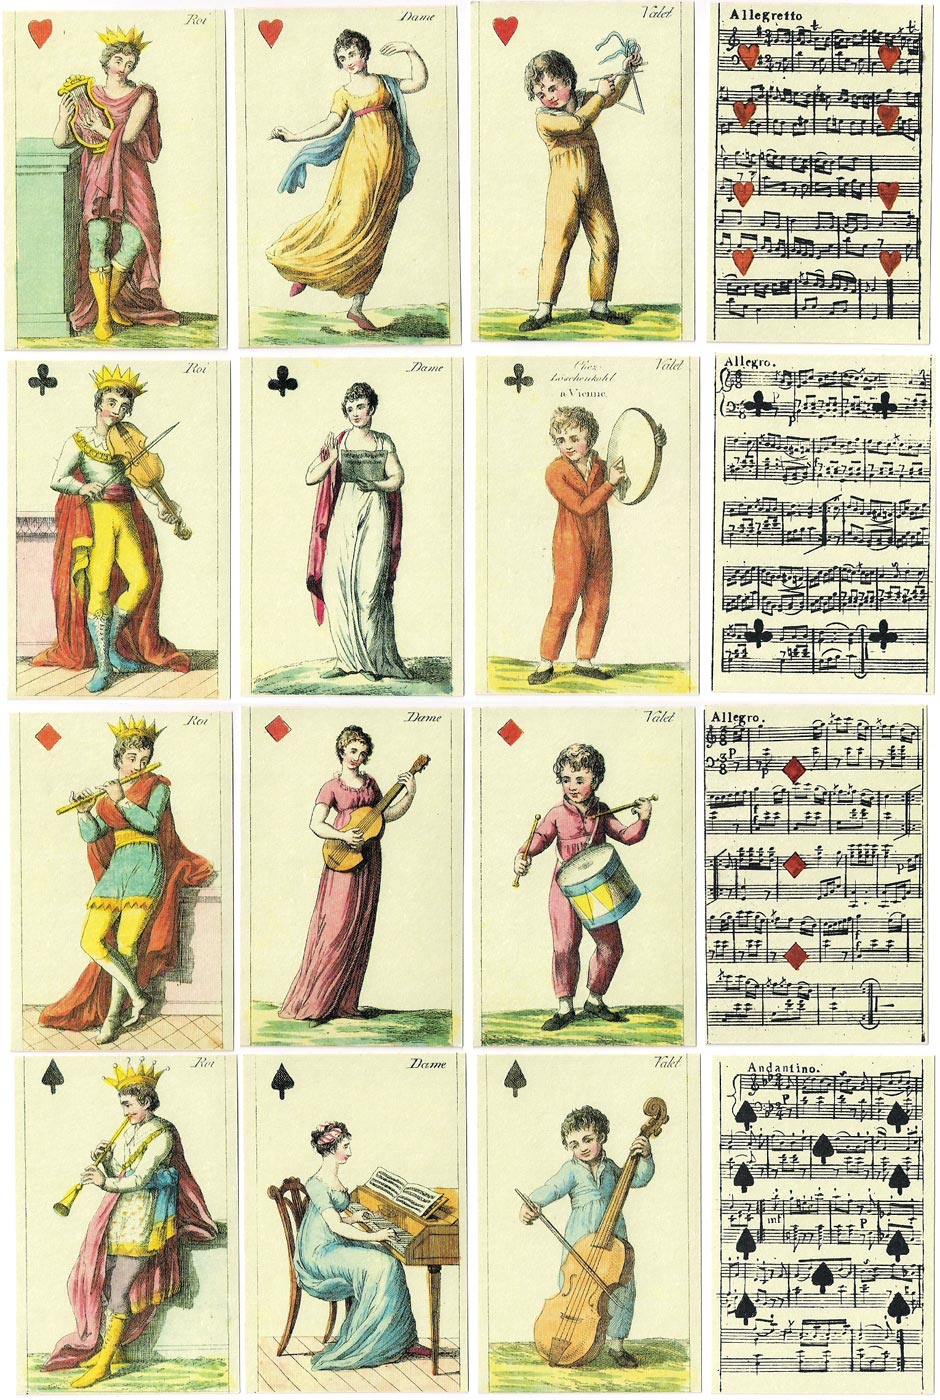 Johann H. Löschenkohl's Musical Playing Cards, originally published in Vienna in 1806